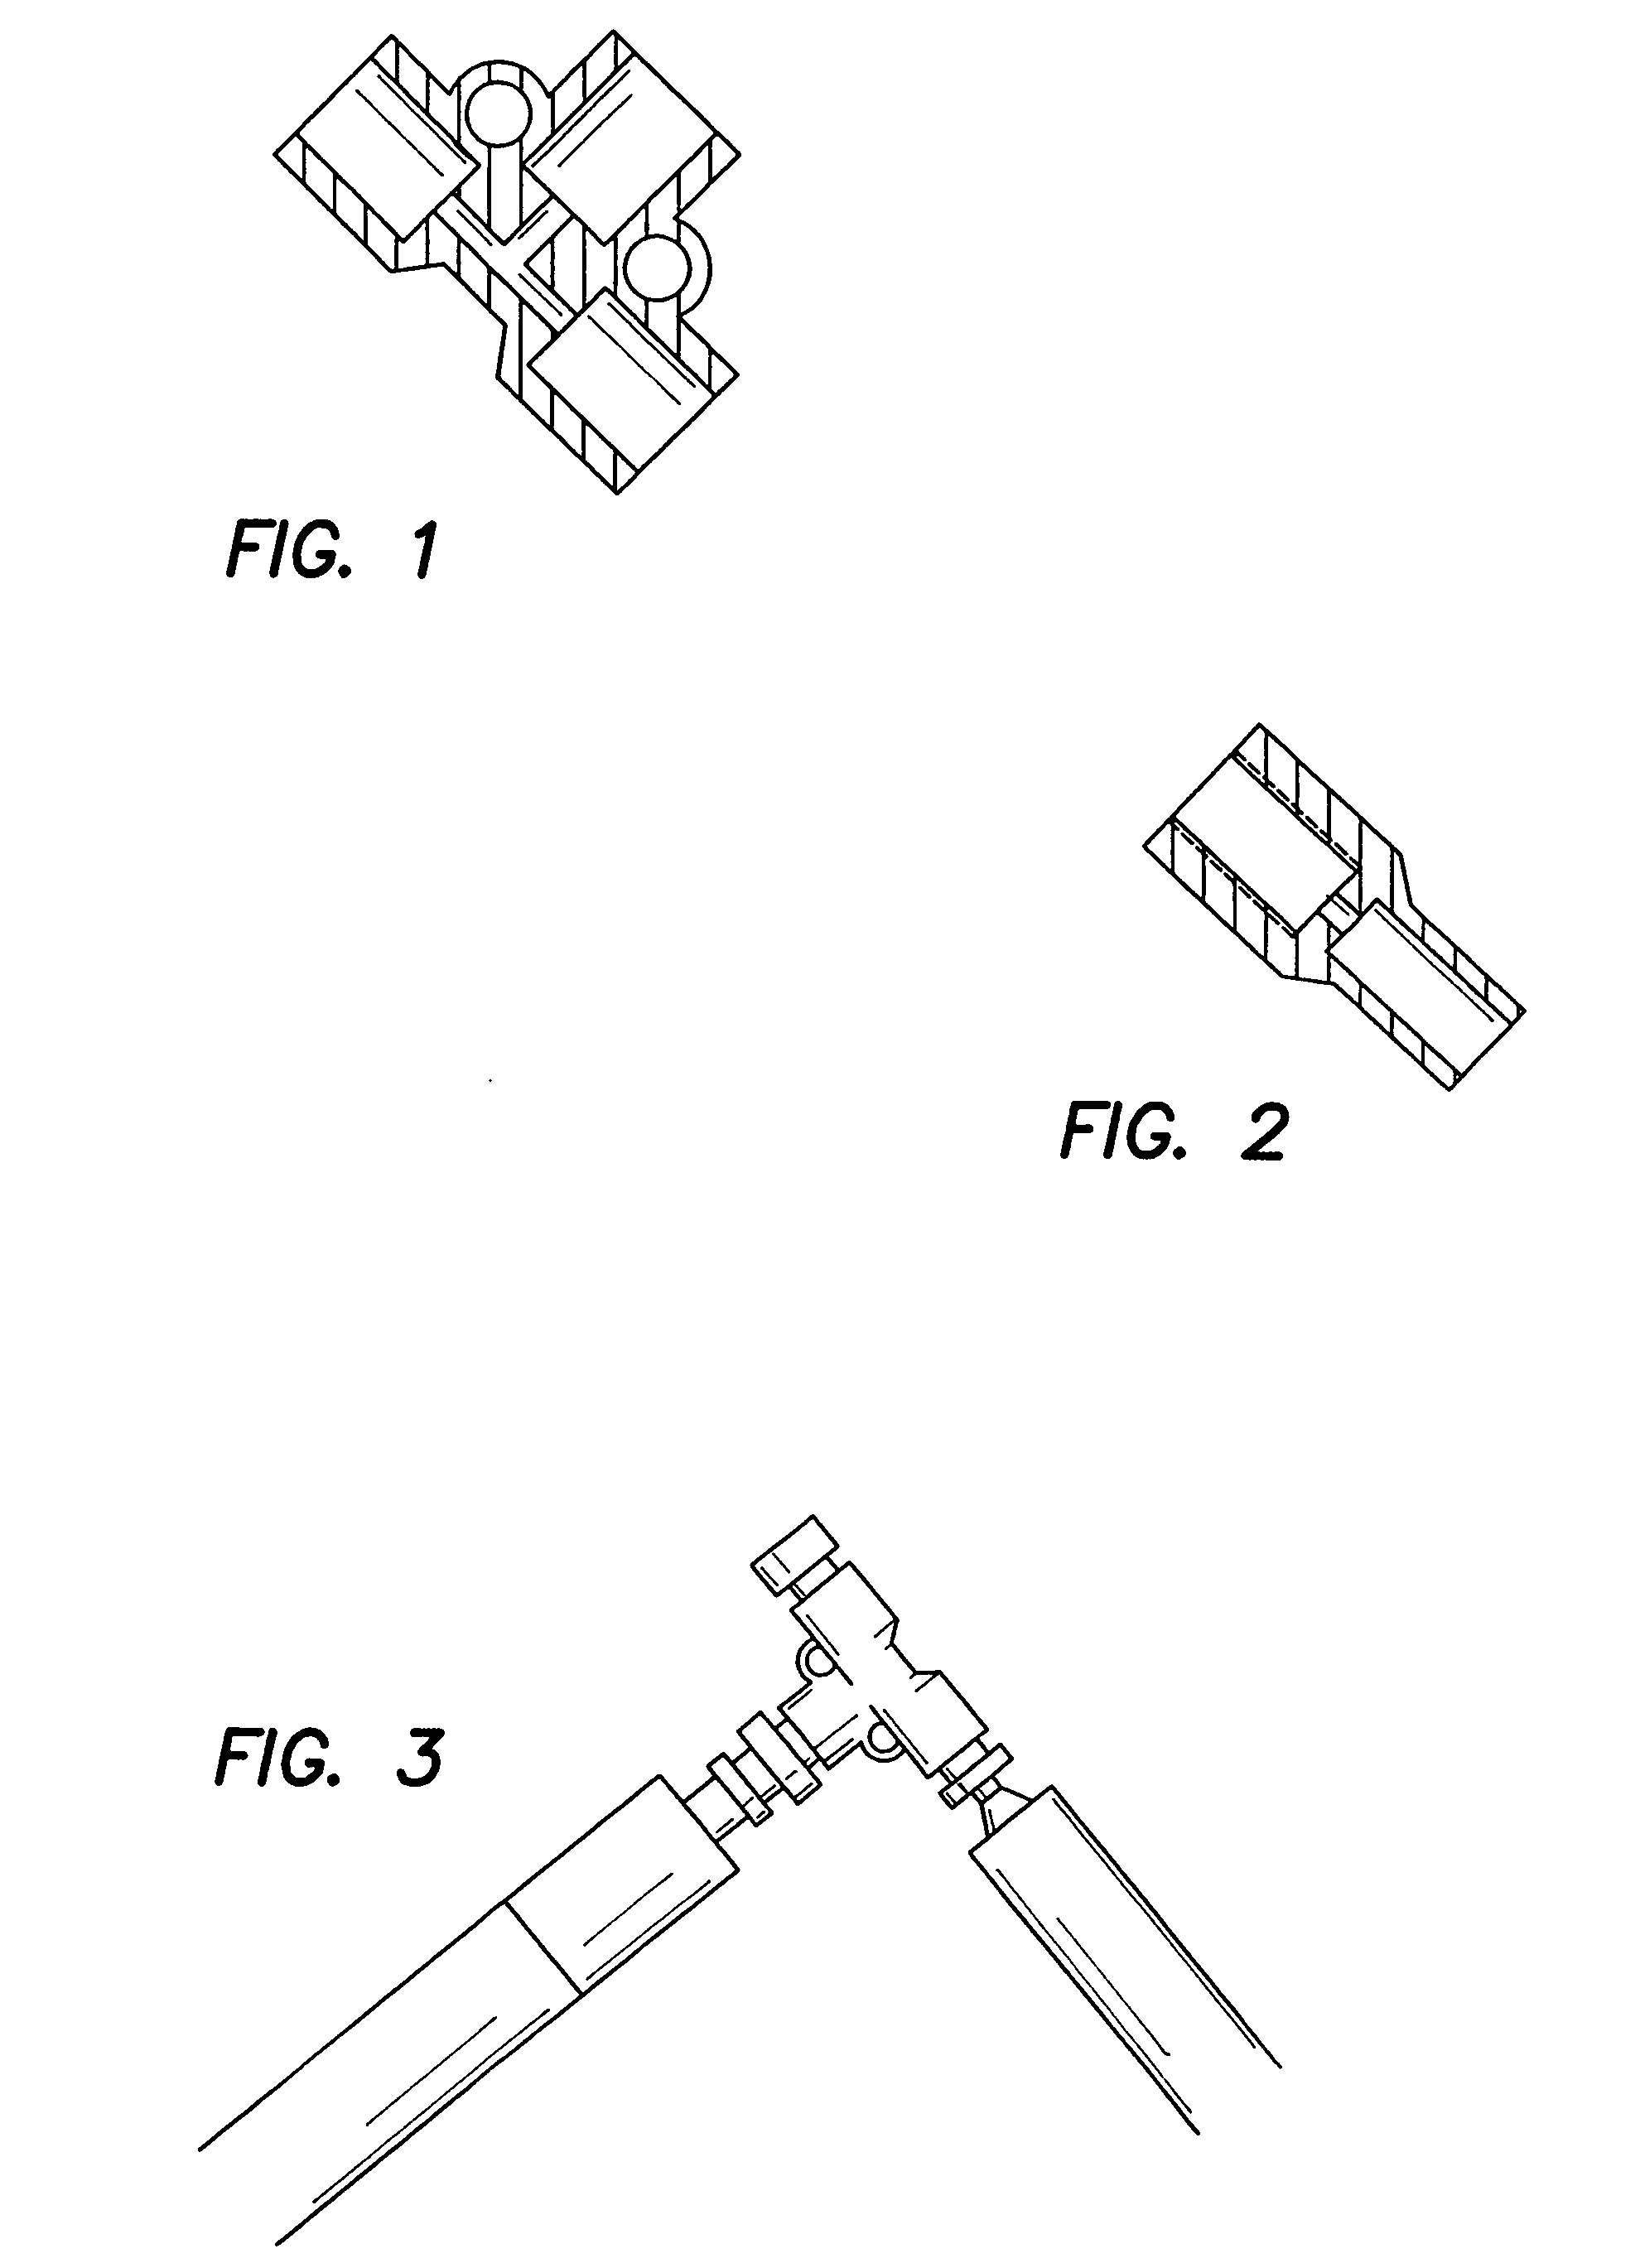 Vision enhancing ophthalmic devices and related methods and compositions